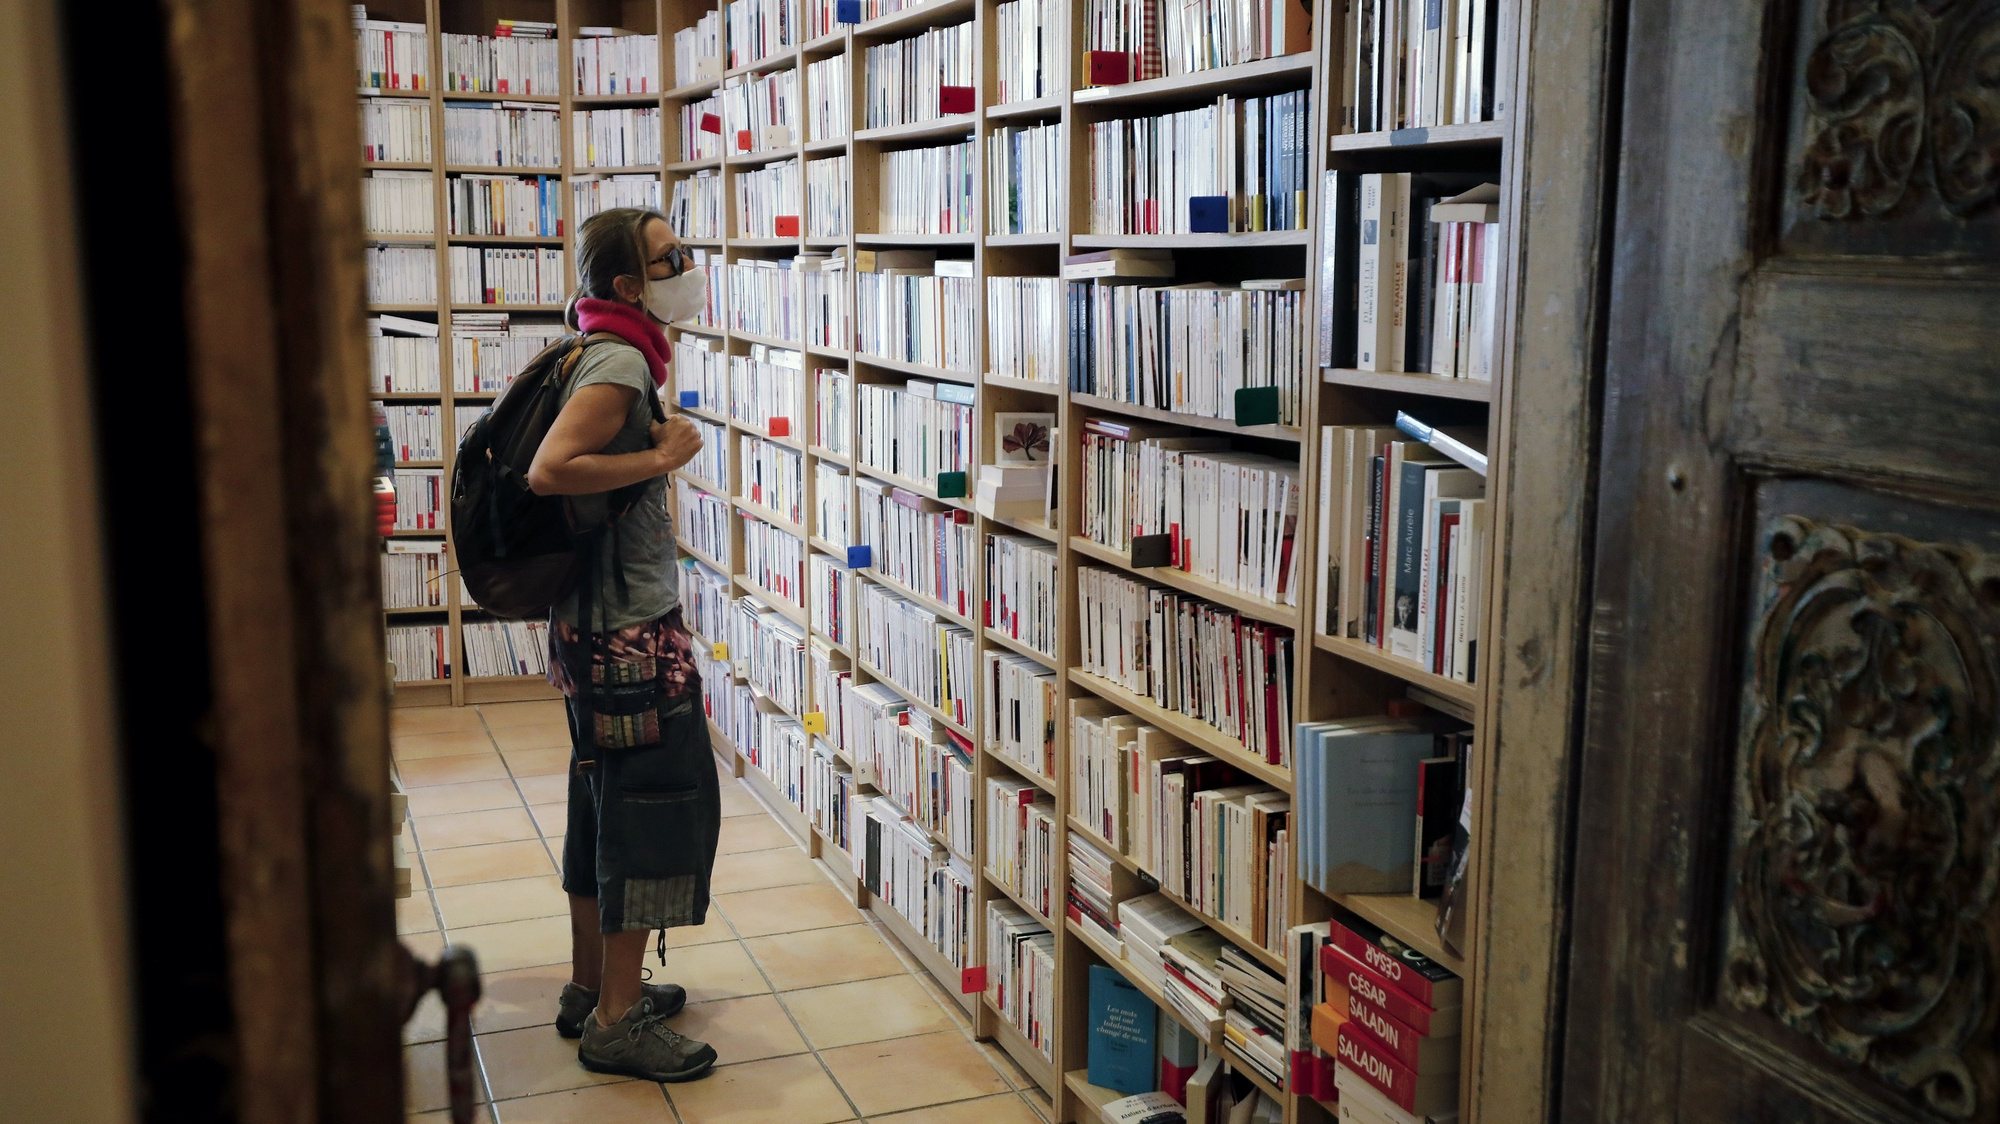 epa08823805 A woman looks at books inside the book store &#039;Autant du Livre&#039; in Cannes, France, 16 November 2020. Owner Florence Kammermann keeps her book store open during the second lockdown following the announcement of French President Macron who announced the closure of non-essential stores including book stores.  EPA/SEBASTIEN NOGIER